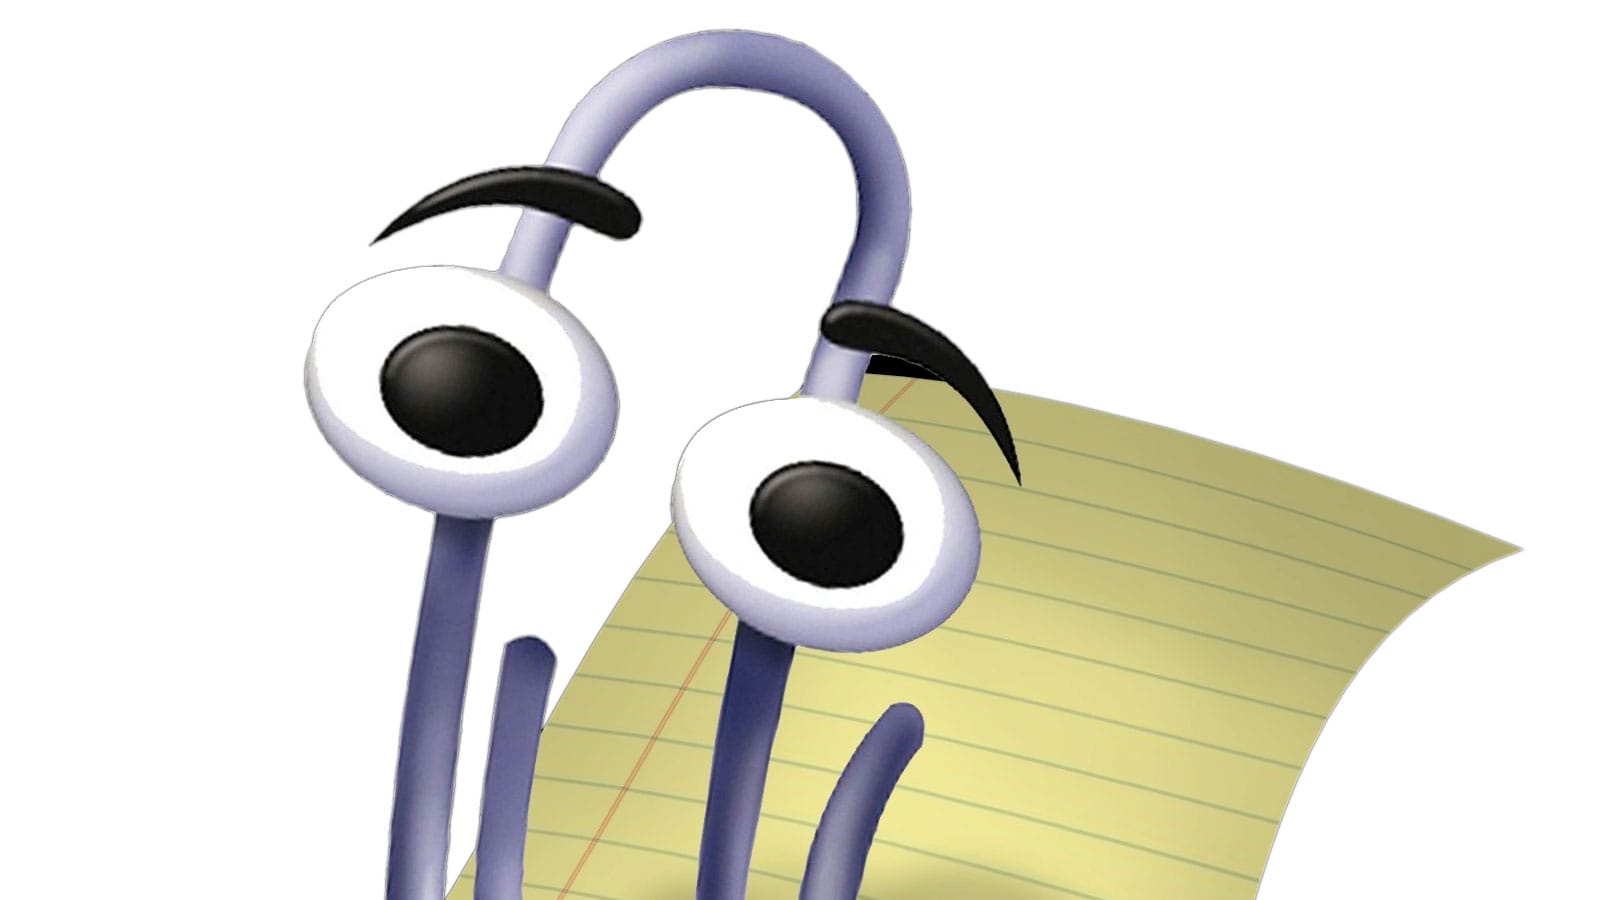 Microsoft Office "Clippy" image over a sheet of yellow lined paper